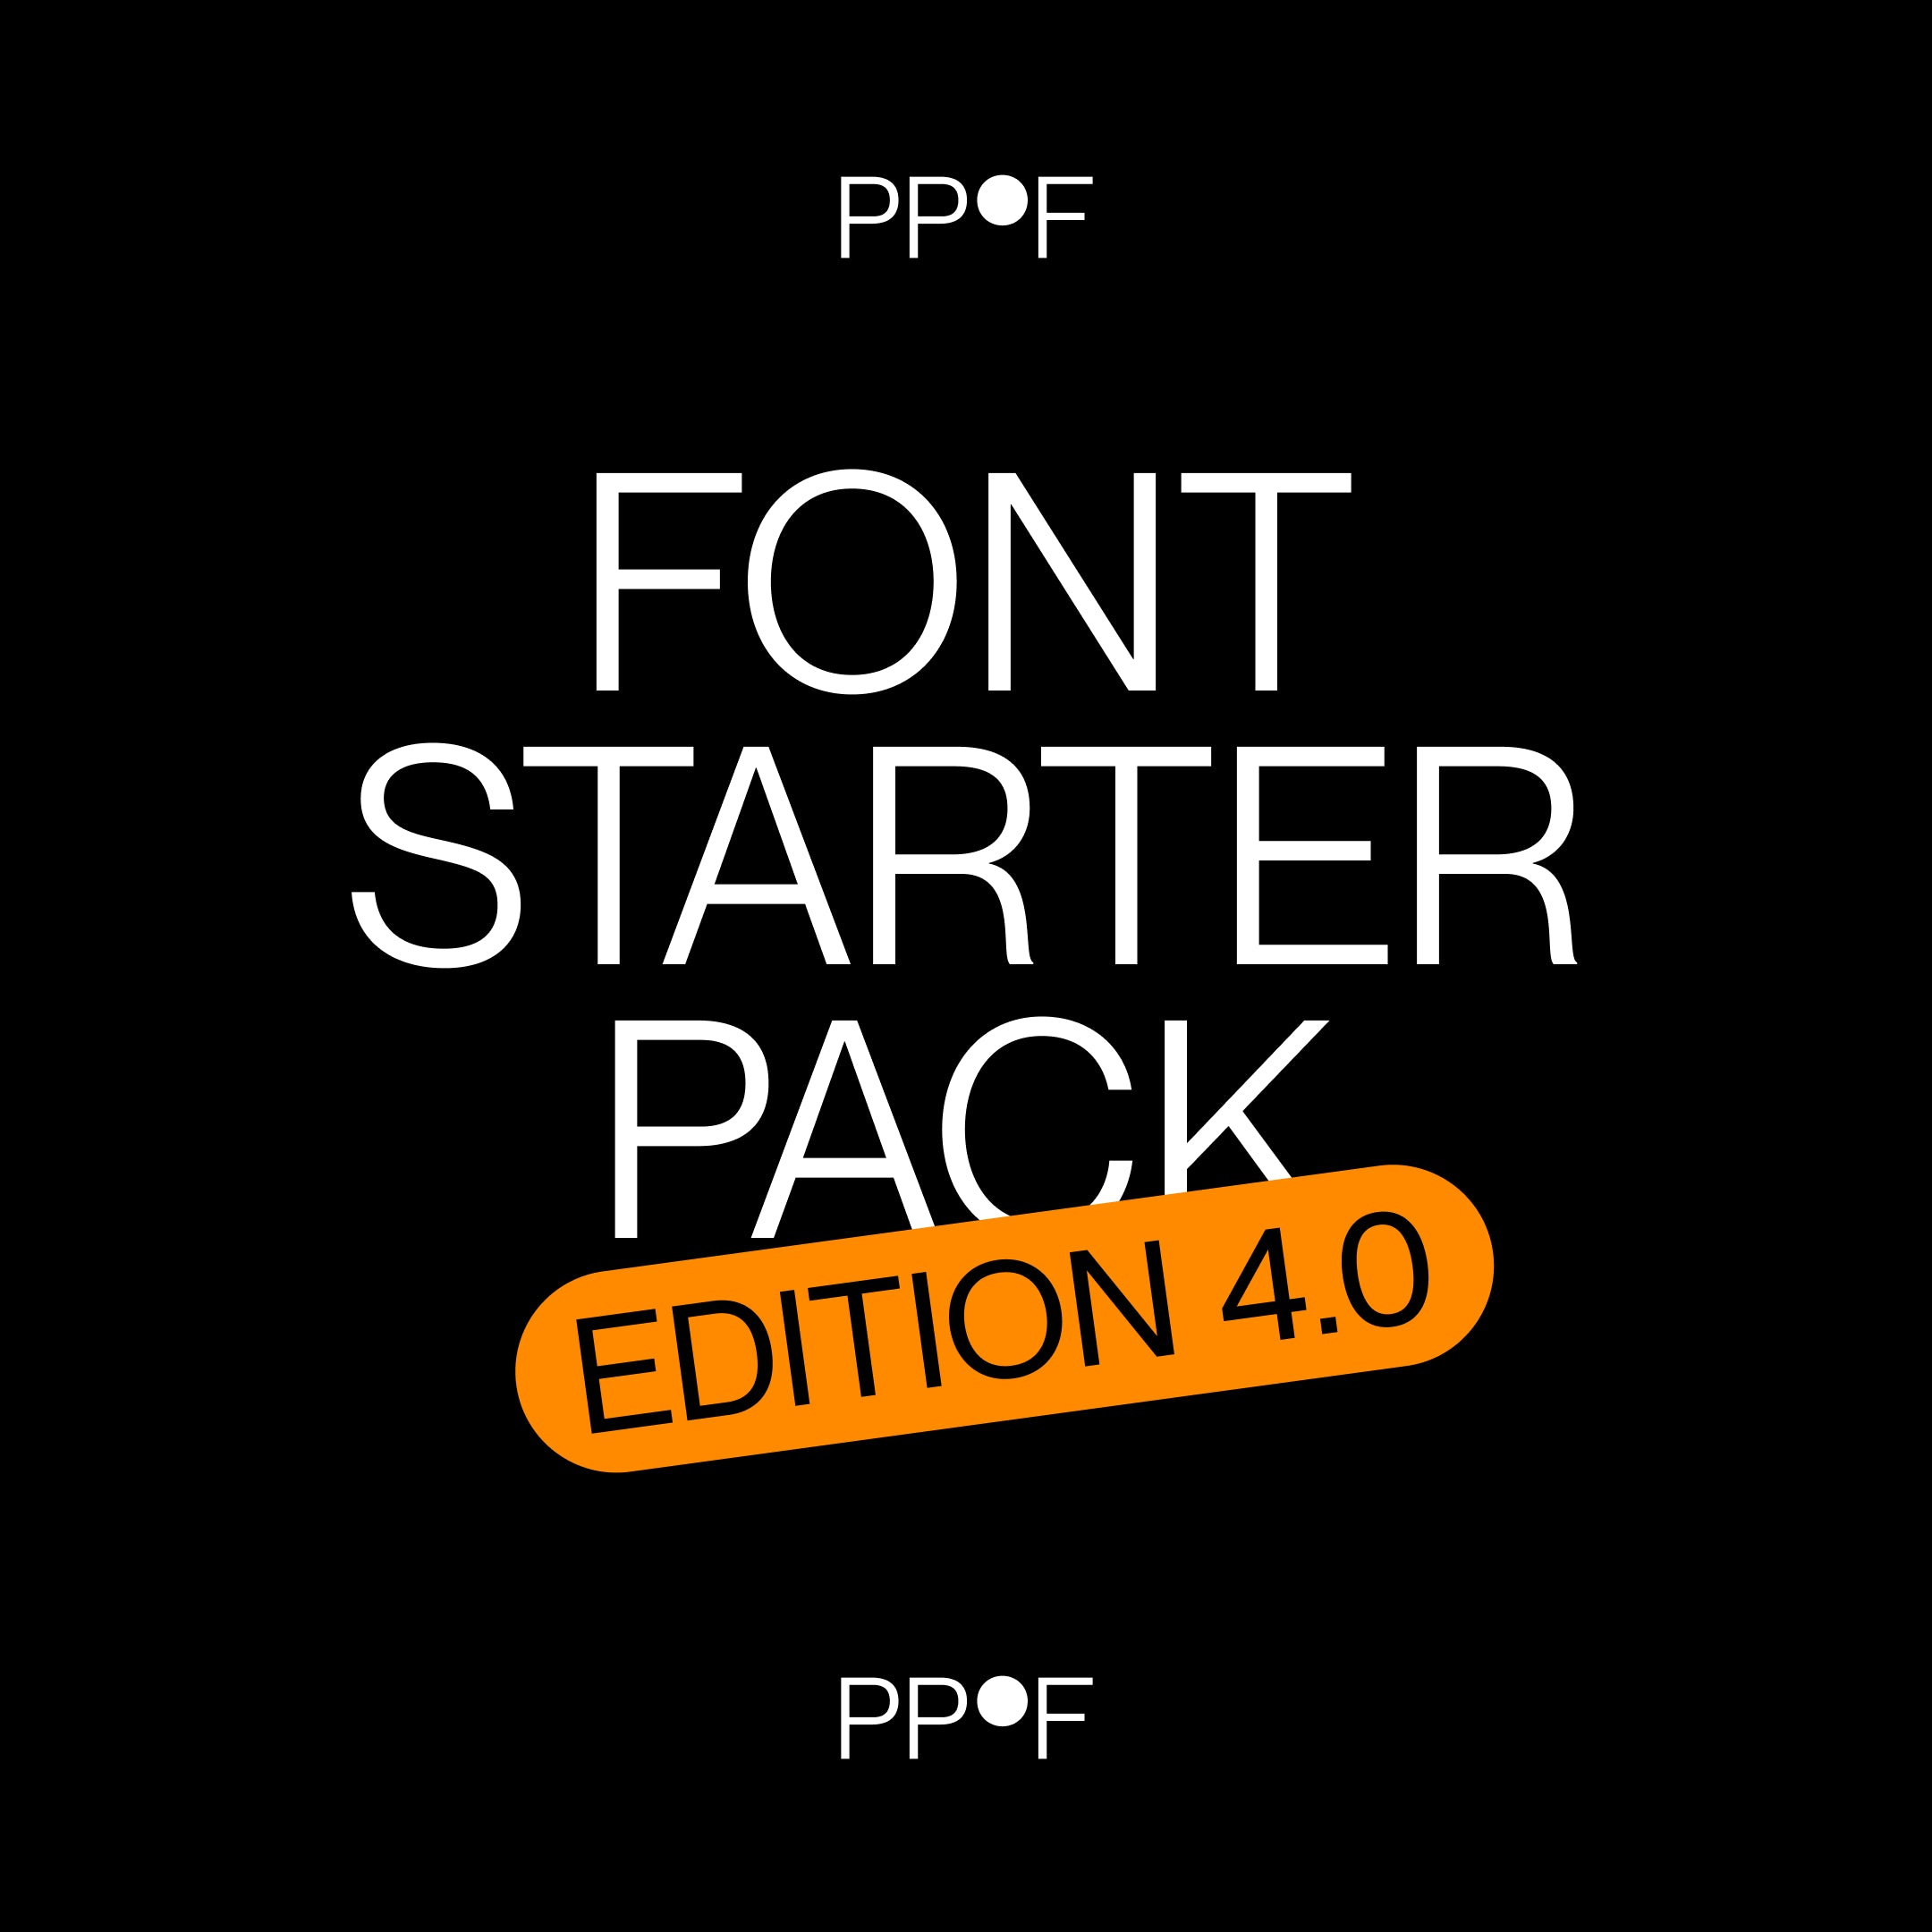 photoshop fonts pack free download